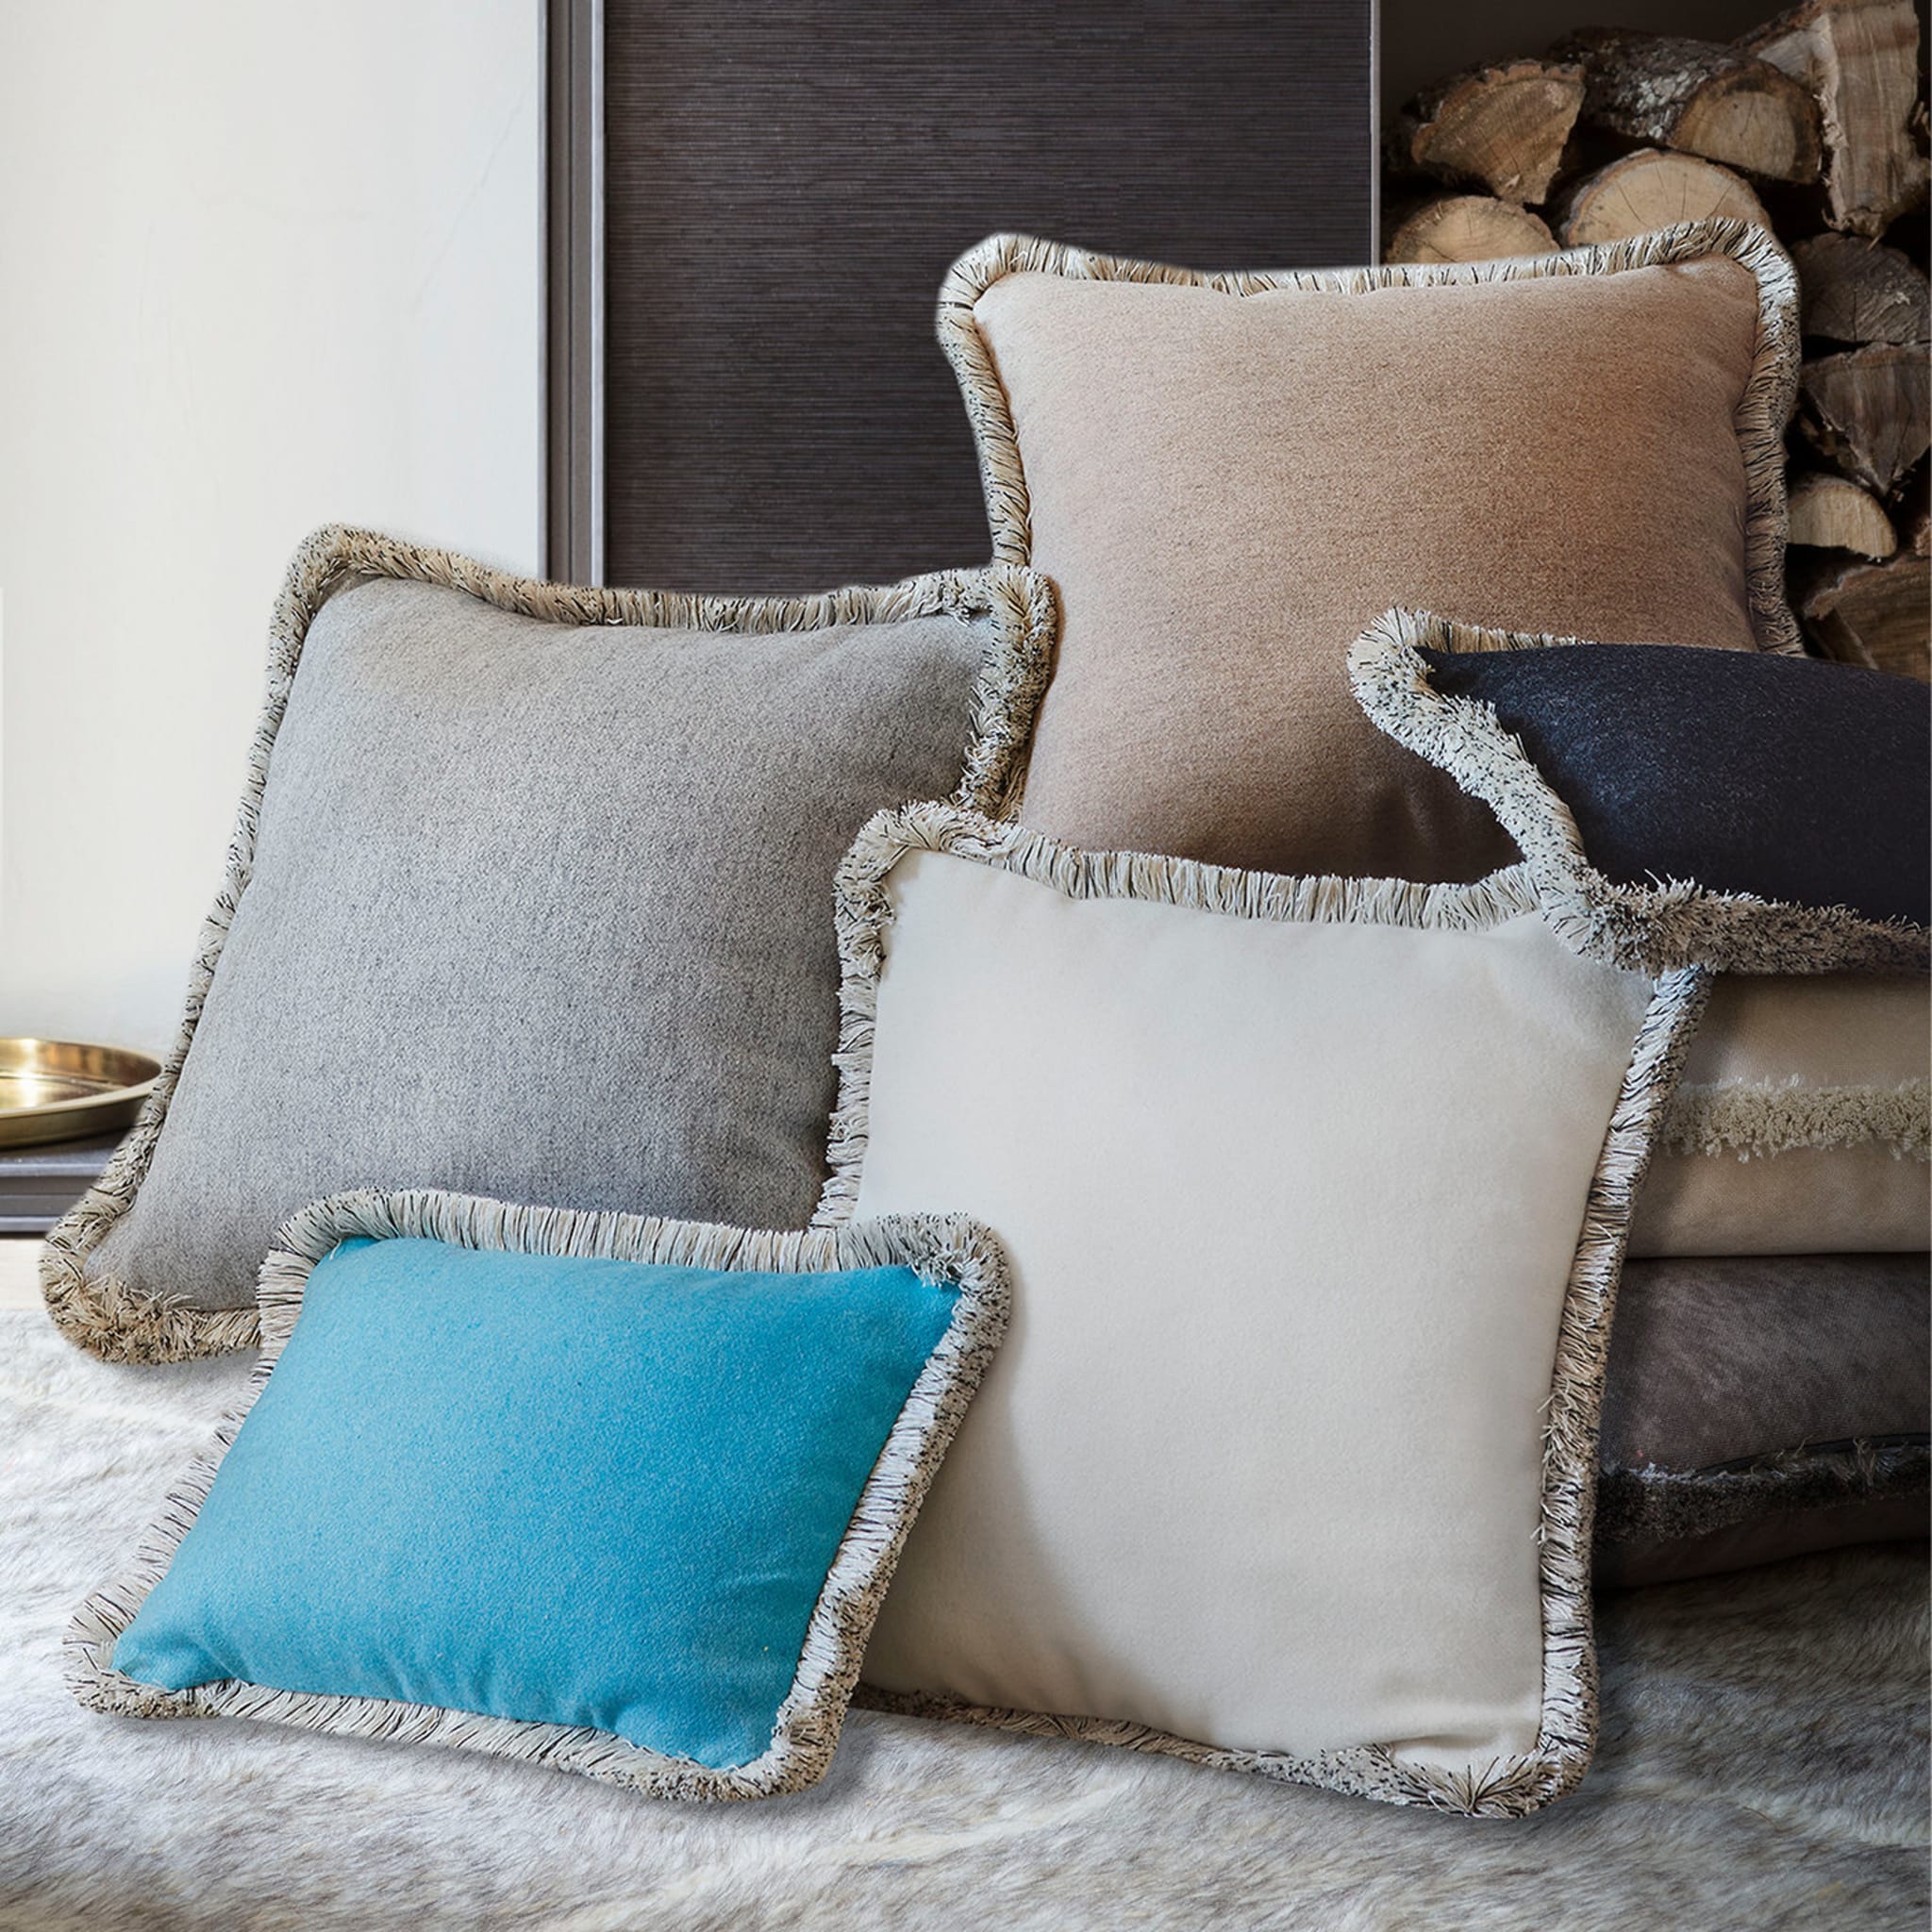 Artic Gray Square Cushion Limited Edition  - Alternative view 1